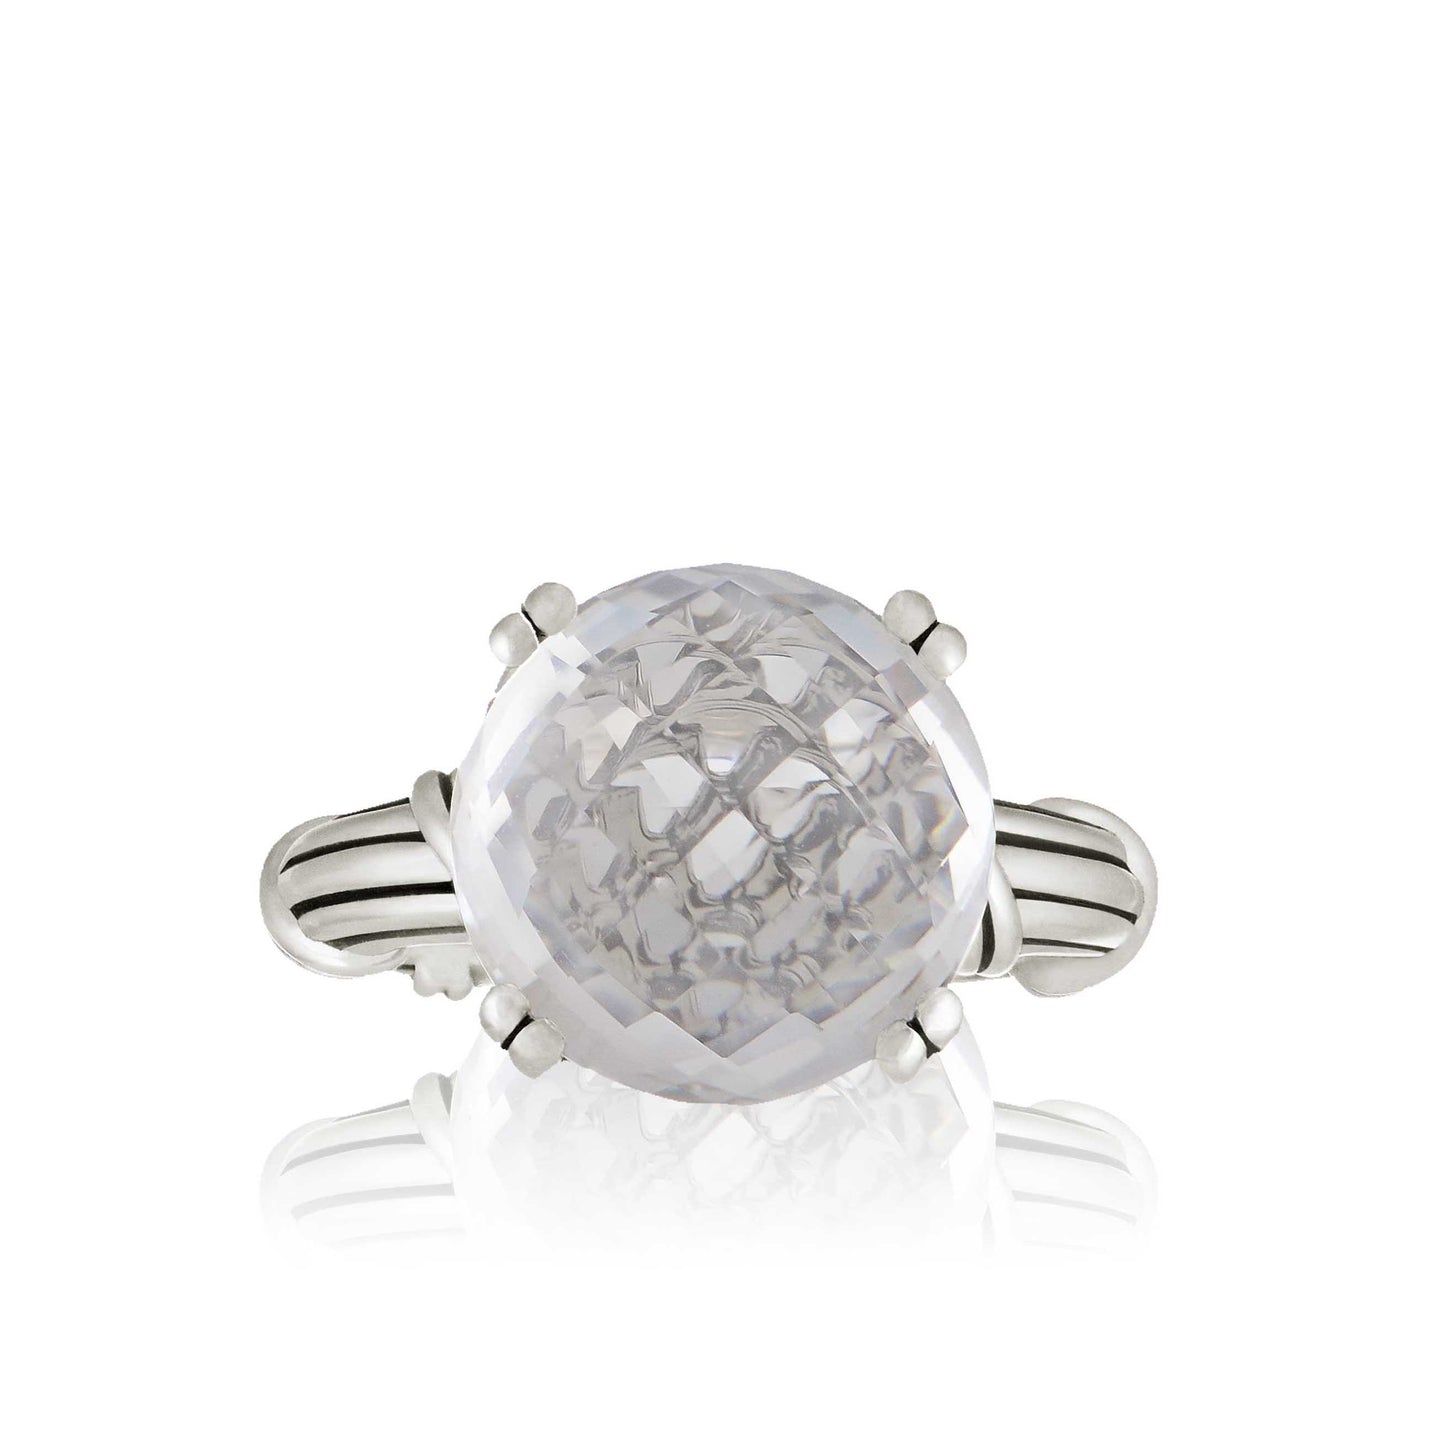 Fantasies Rock Crystal Cocktail Ring in sterling silver